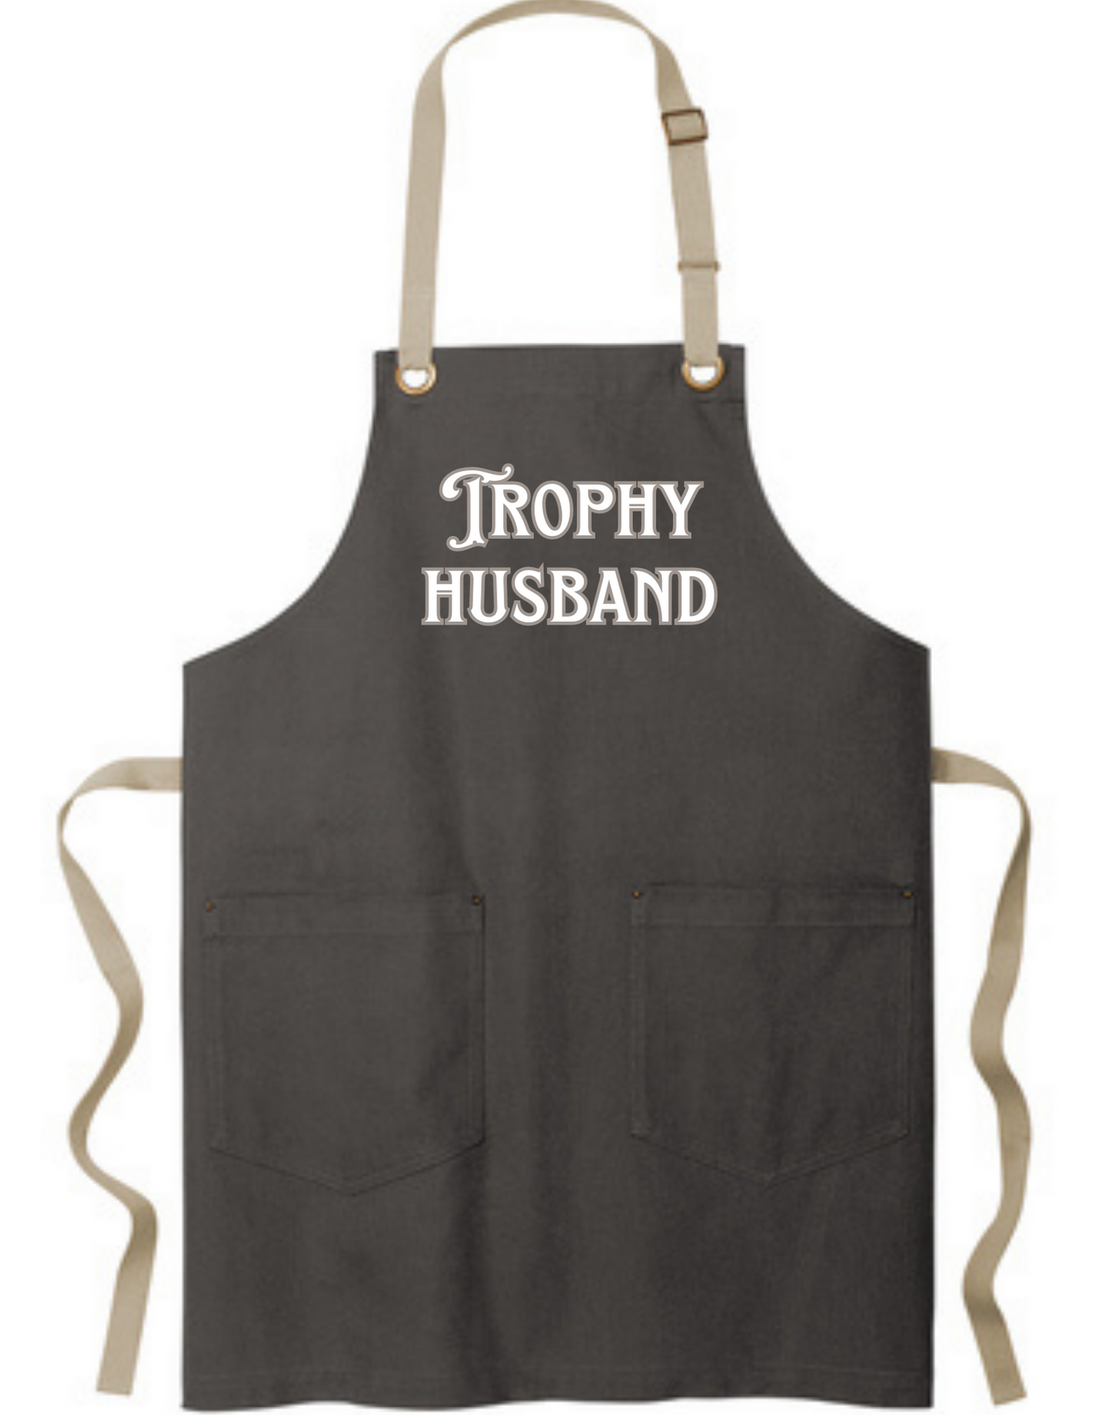 Gray apron with Trophy Husband printed across the front.